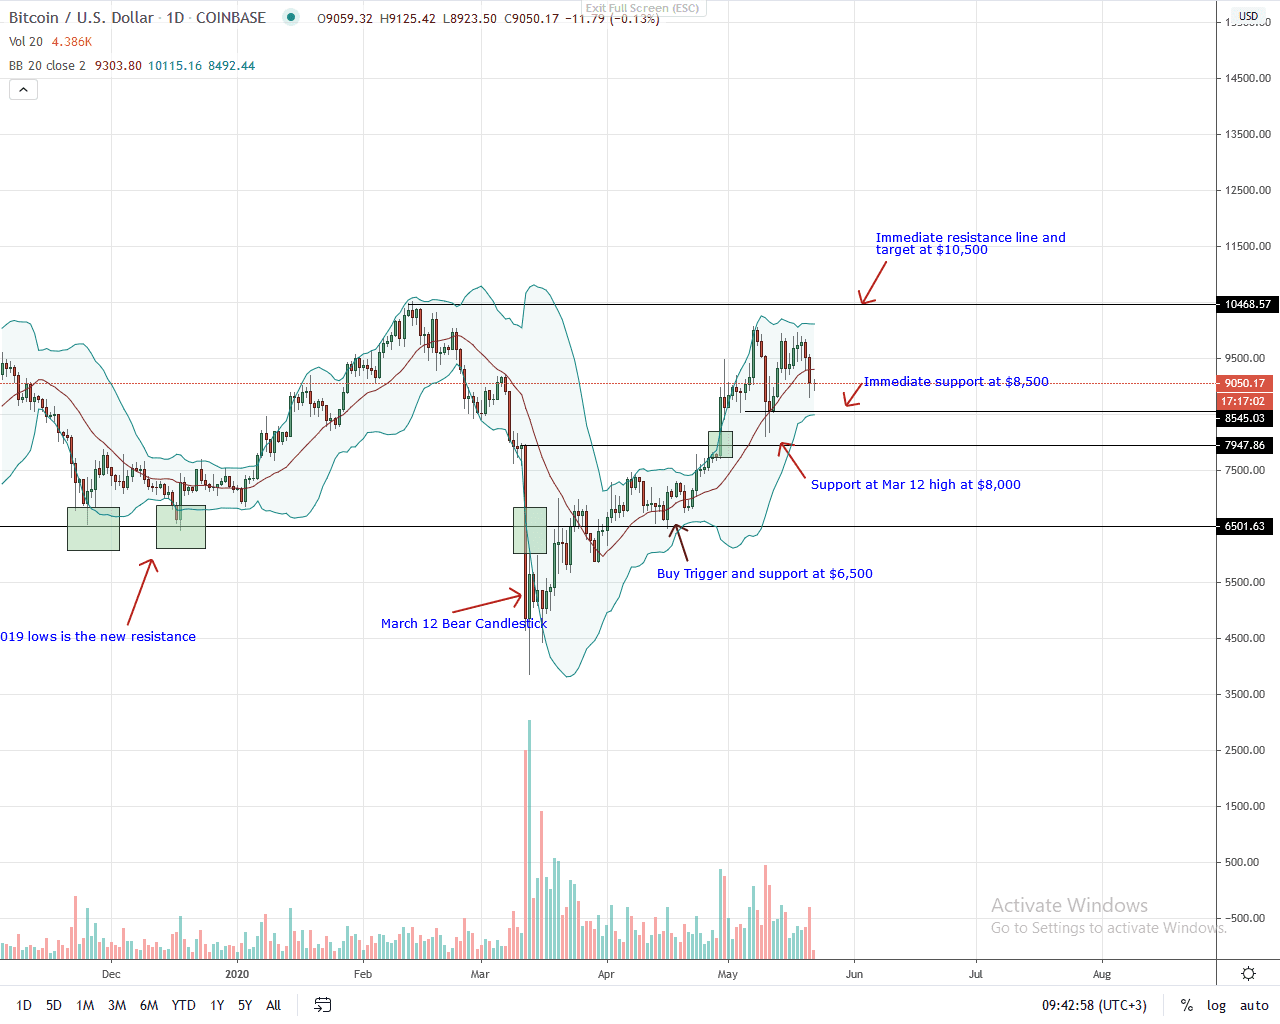 Bitcoin Daily Chart for May 22